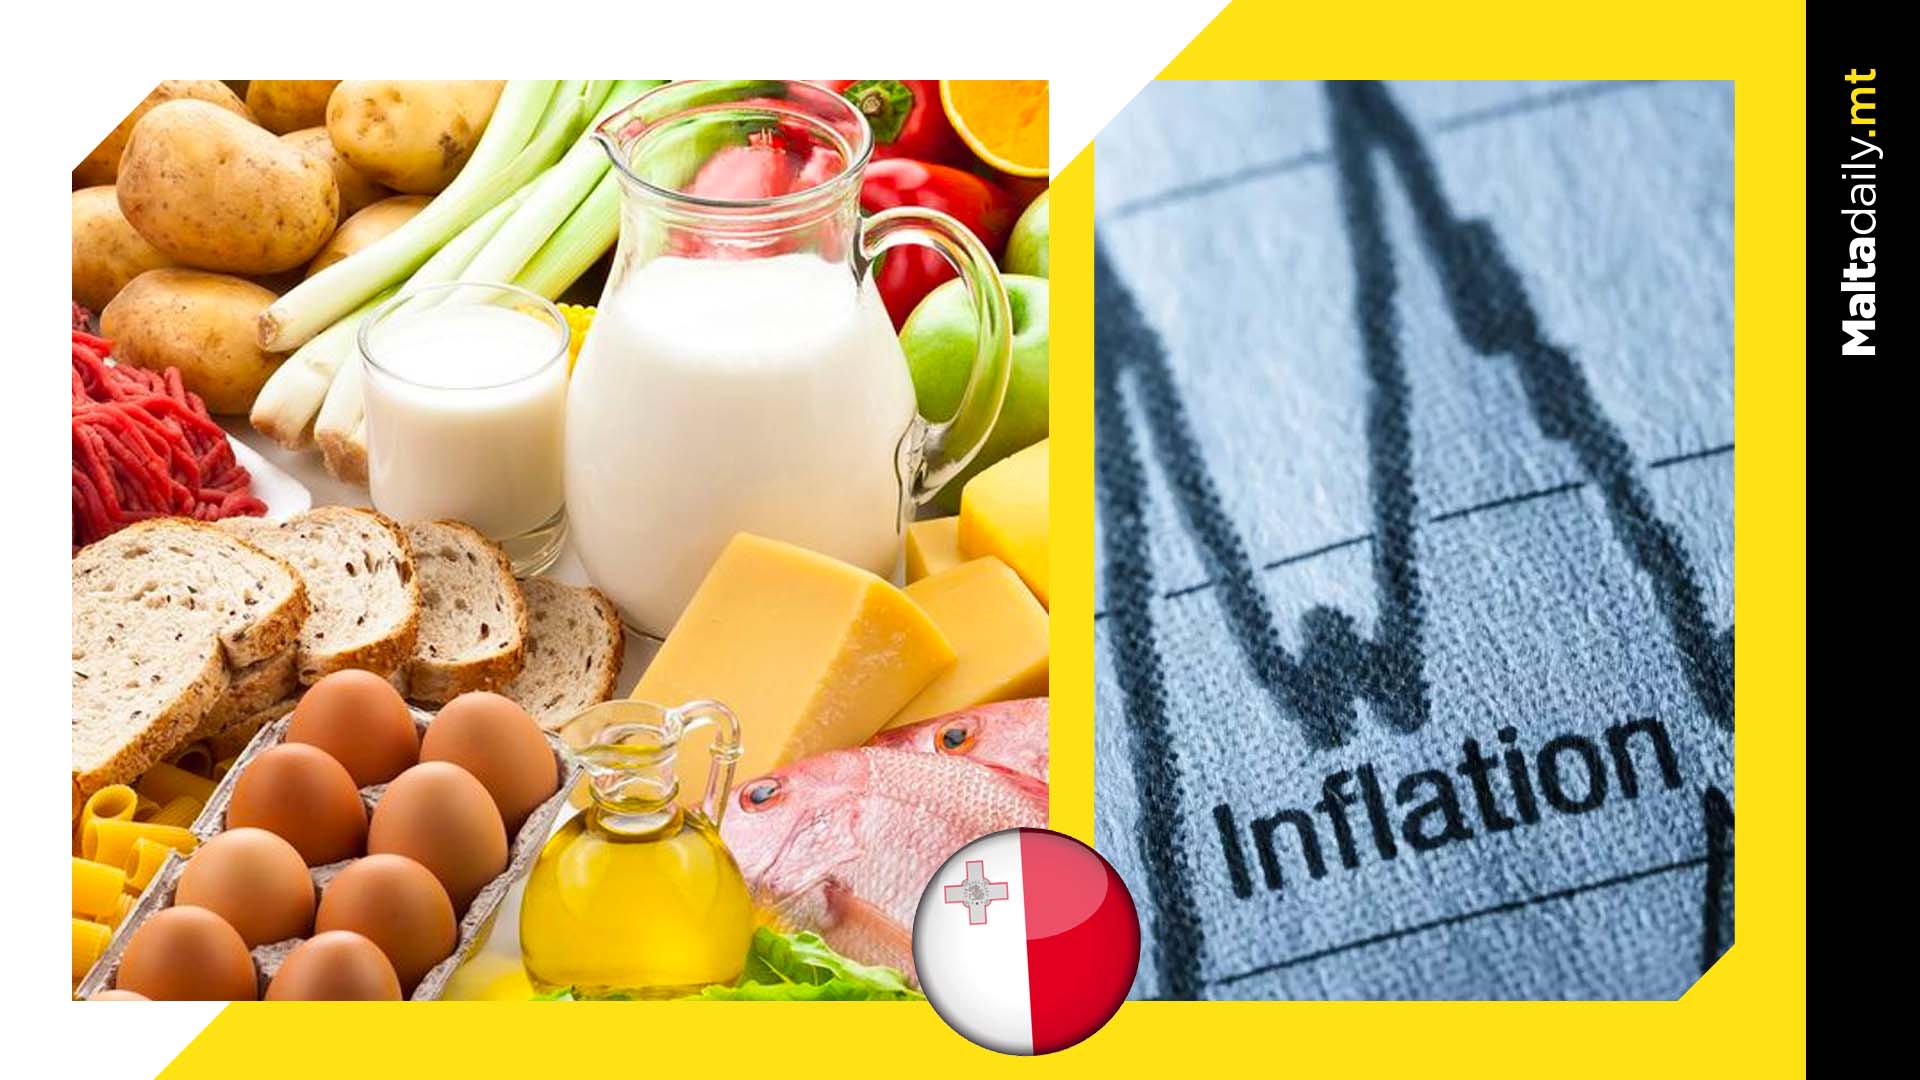 Highest annual inflation rates in January 2023 for food & non-alcoholic beverages